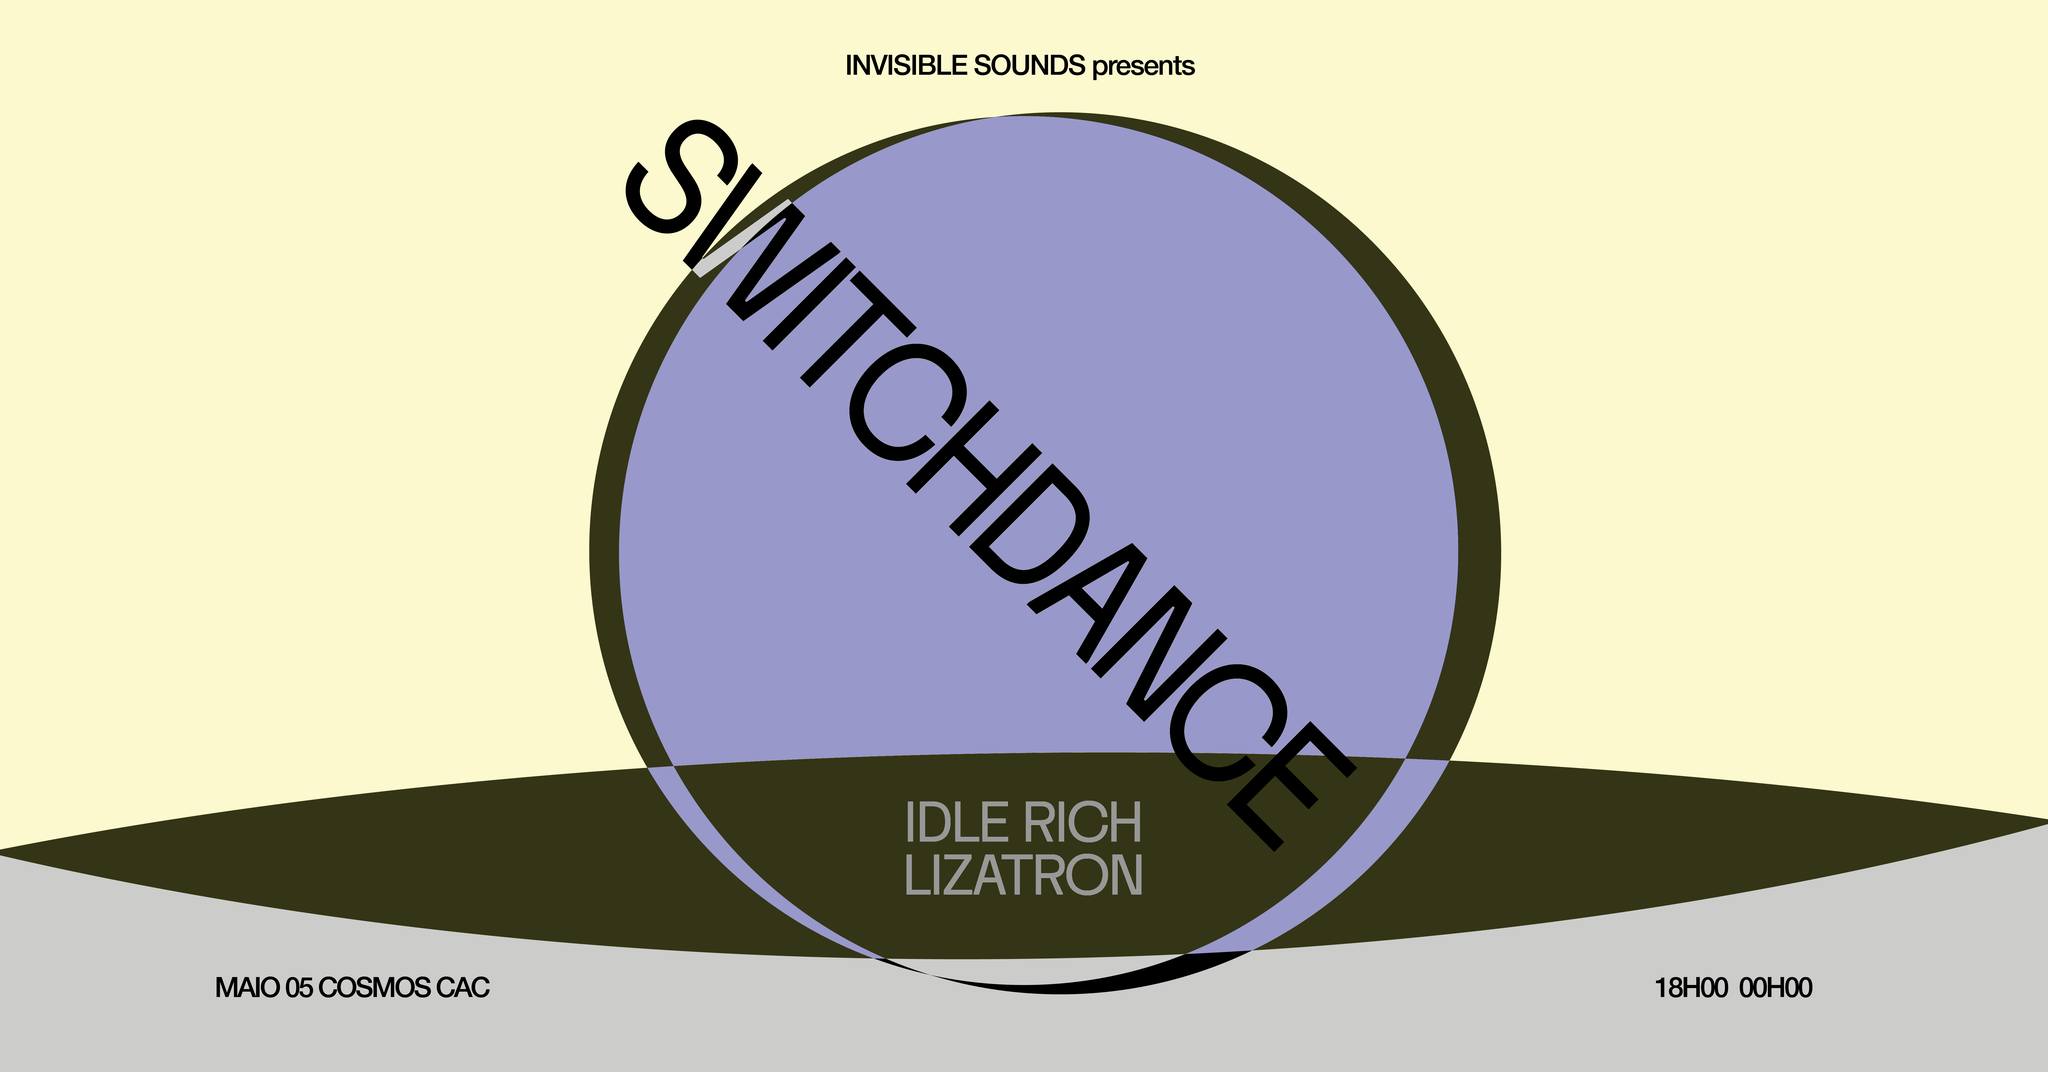 Switchdance + Invisible Sounds